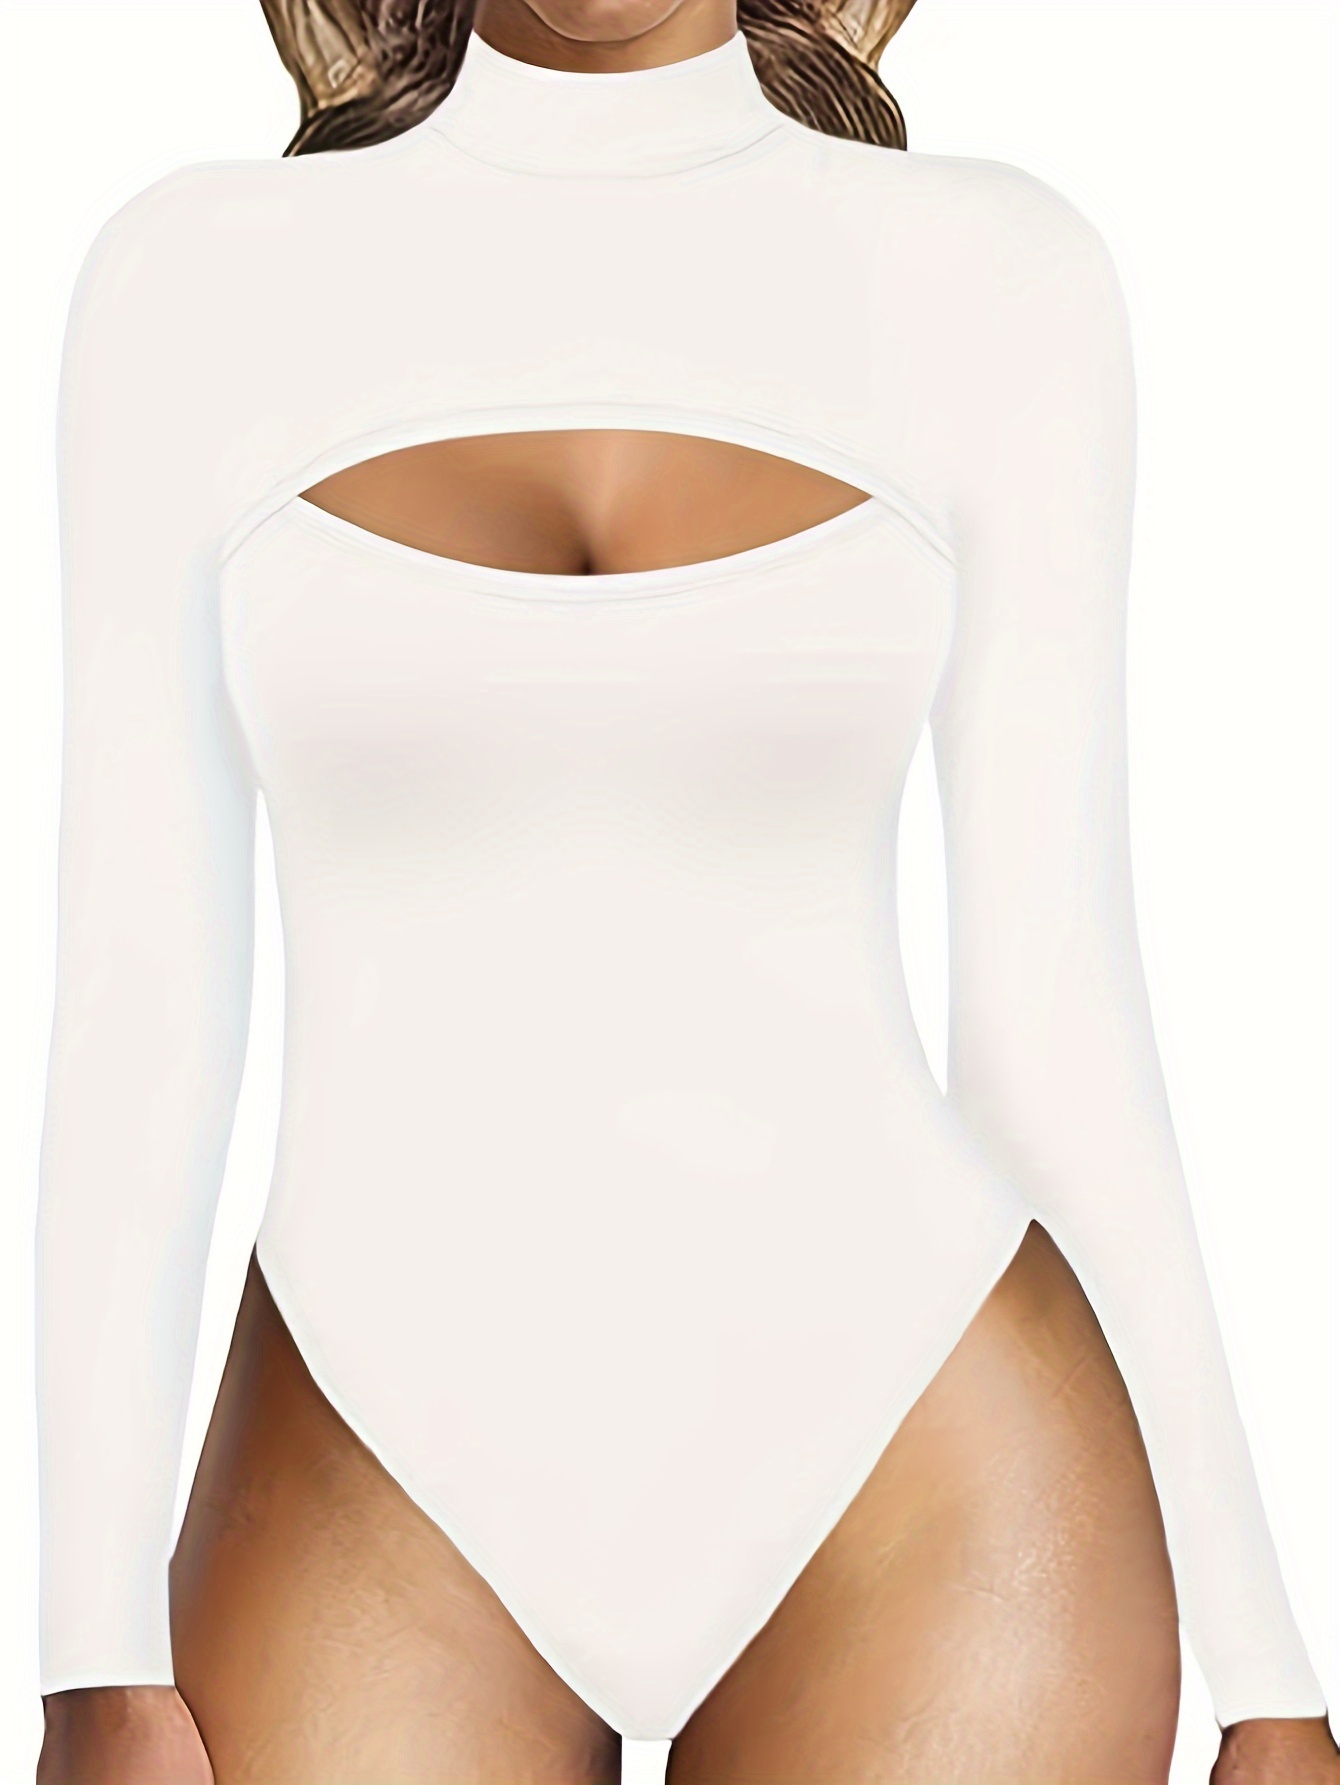 White Shapewear Bodysuit For Women Tummy Control Body Shaper Seamless Low  Cut Leotards Deep V Neck Long Sleeve Body Suits Tops One Piece Jumpsuits  For